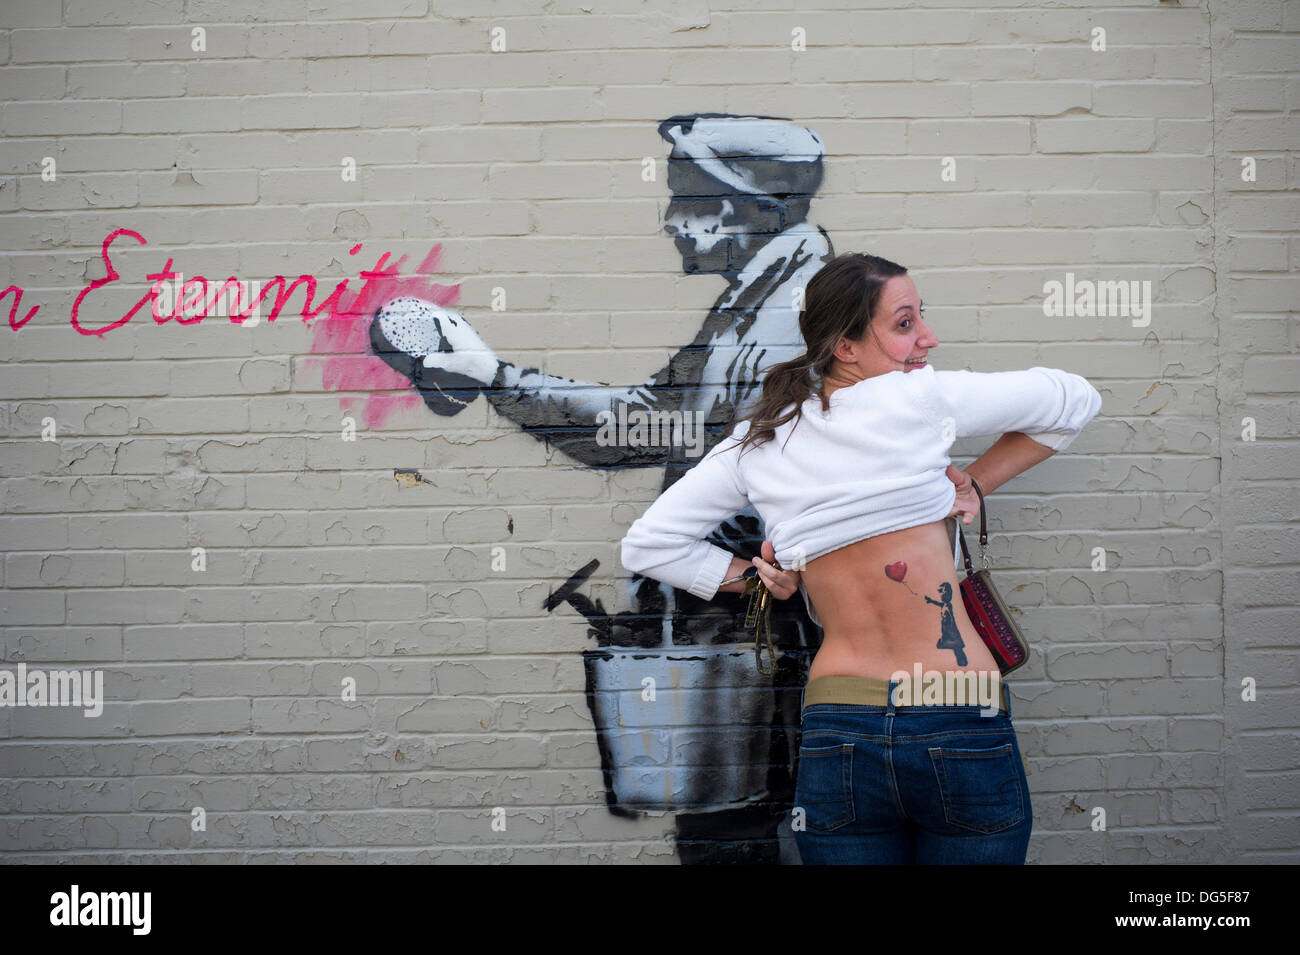 Queens, NY, USA . 14th Oct, 2013. A street art enthusiast shows off her  Banksy inspired tattoo in the Woodside neighborhood of Queens in New York  on Monday, October 14, 2013 in